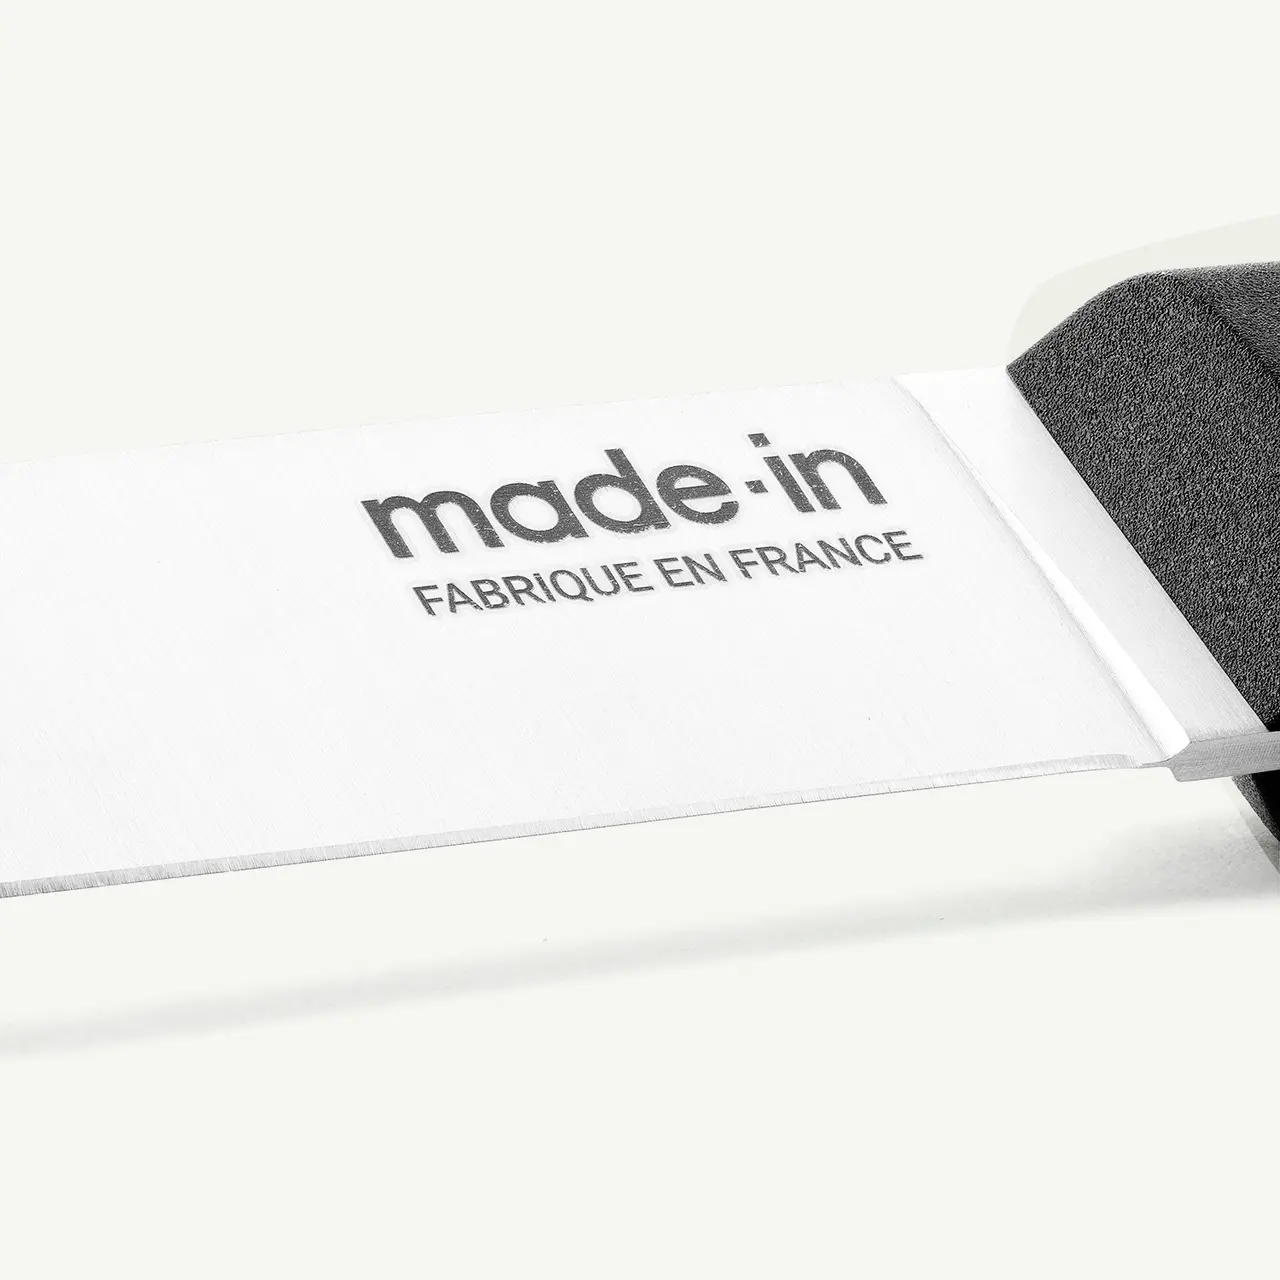 A clothing label reads "made in Fabrique en France" against a white background.